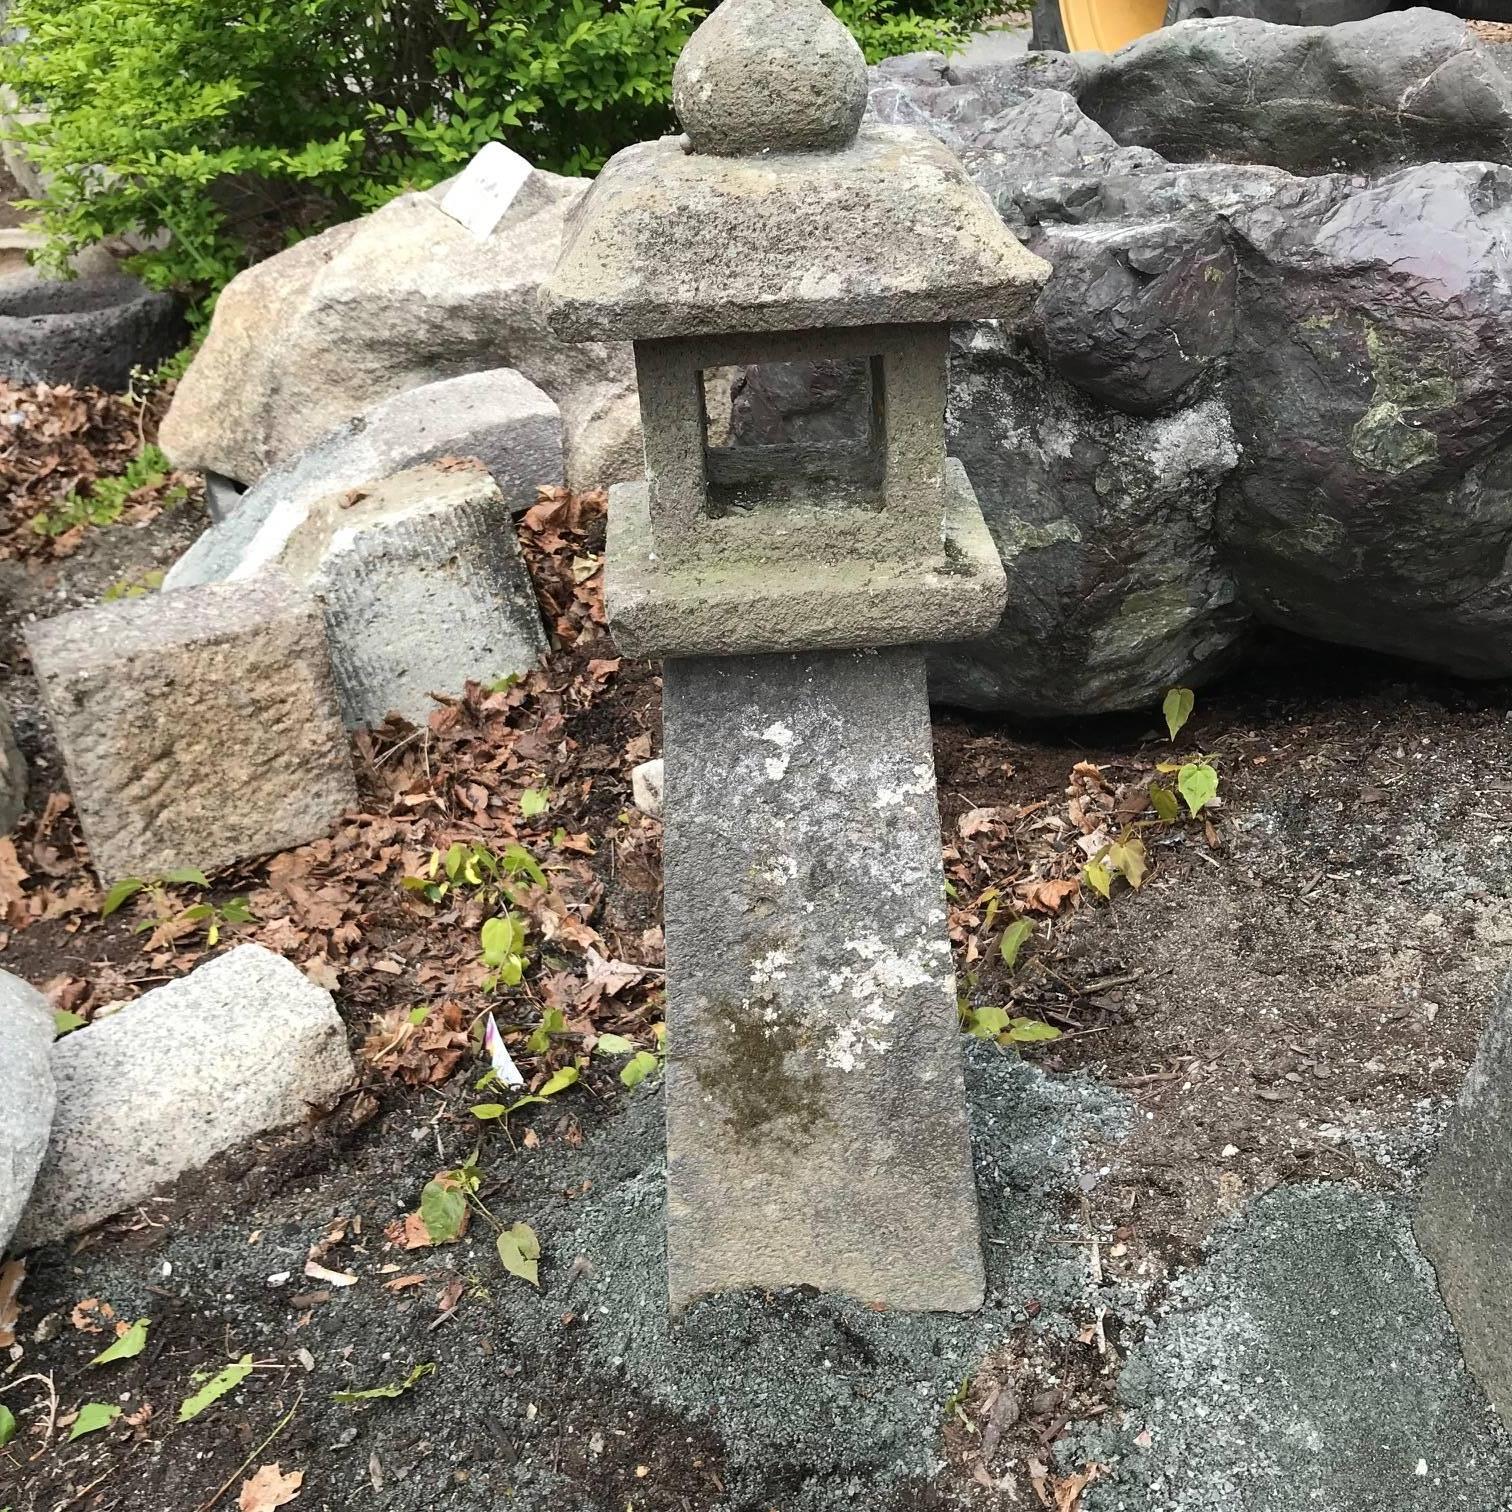 Seldom available- rare petite lanterns in a Japanese arts and crafts style 

Japan, a fine pair of pathway stone lanterns with original and beautiful lichen and patina from good age

They work especially well at night with an oil candle.  See our